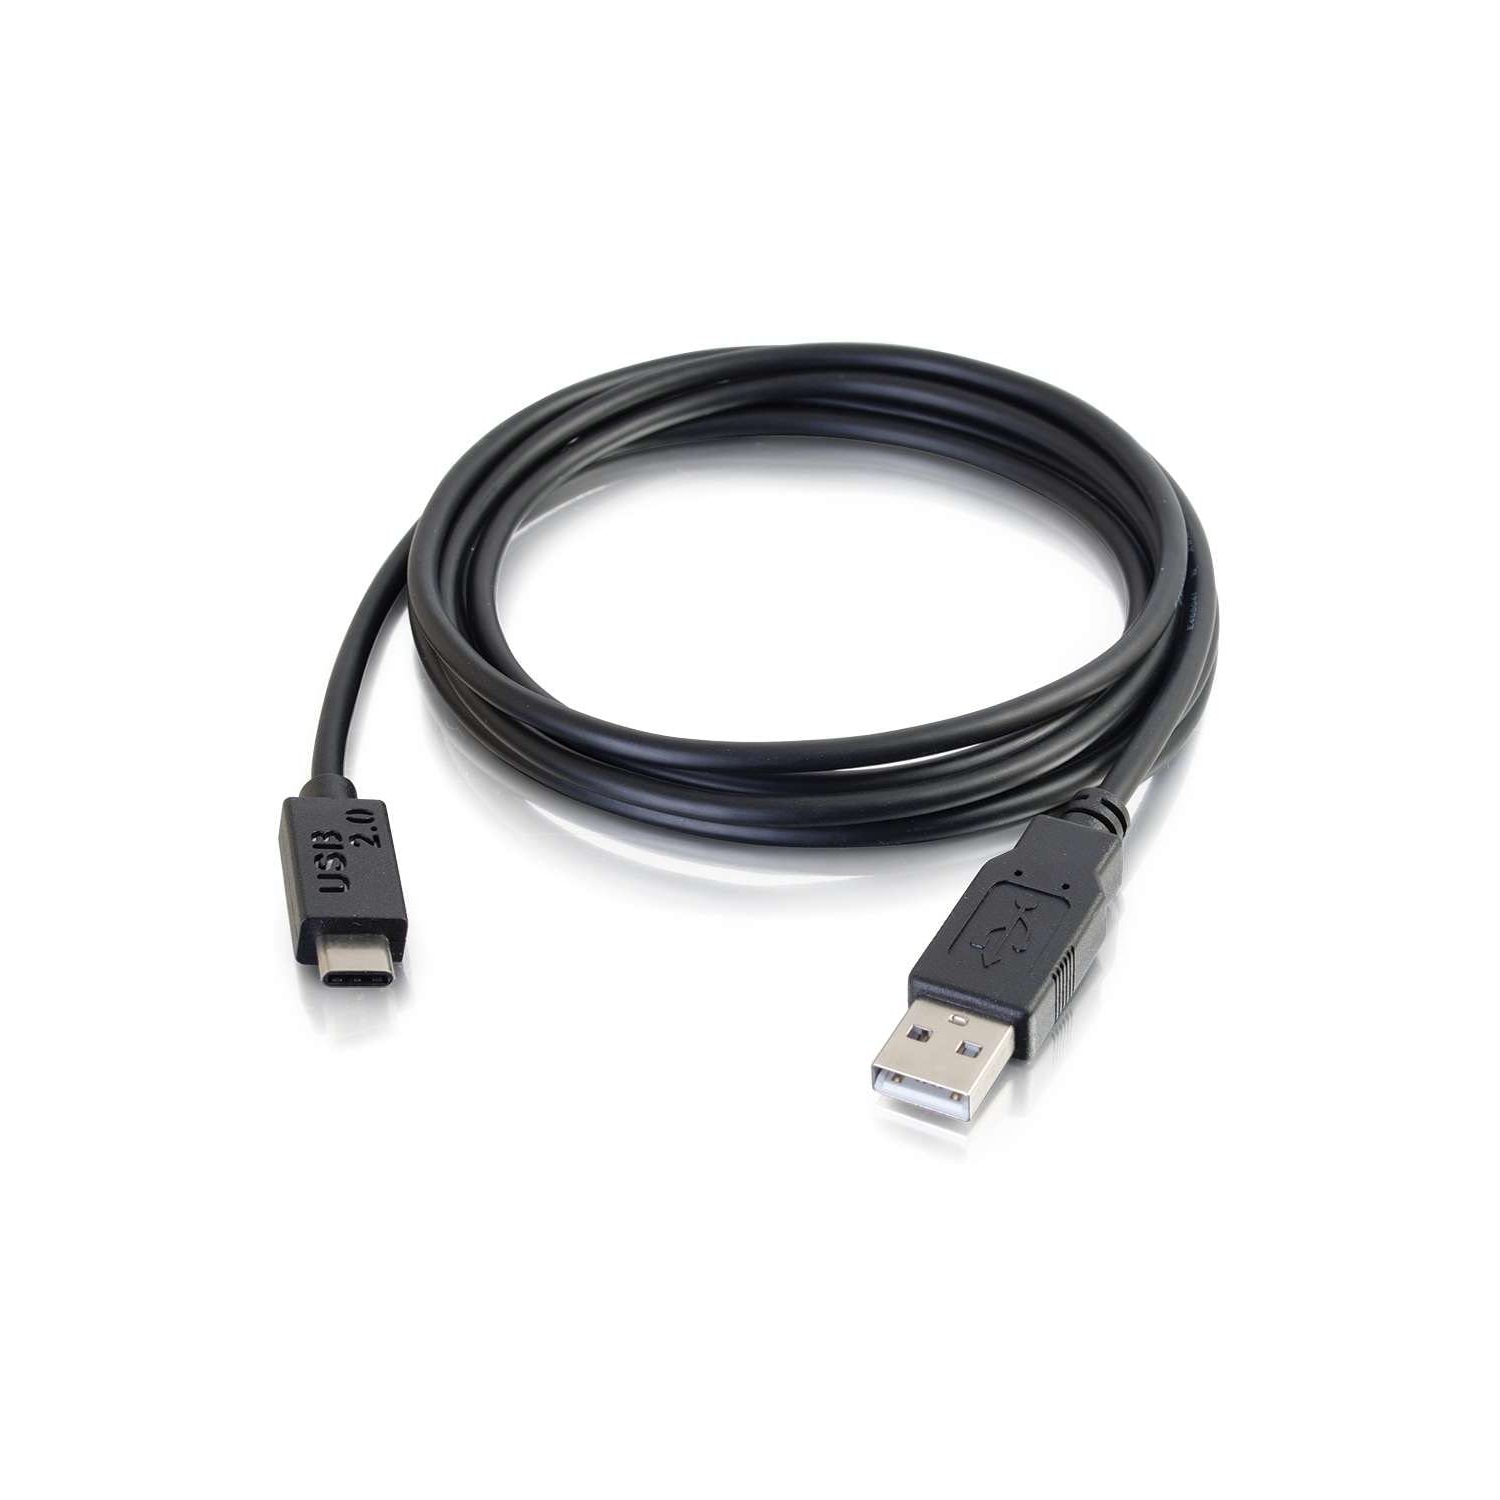 28871 USB 2.0 USB-C to USB-A Cable, Male to Male (6 Feet) Thunderbolt 3, Tablet, Chromebook Pixel, Samsung Galaxy